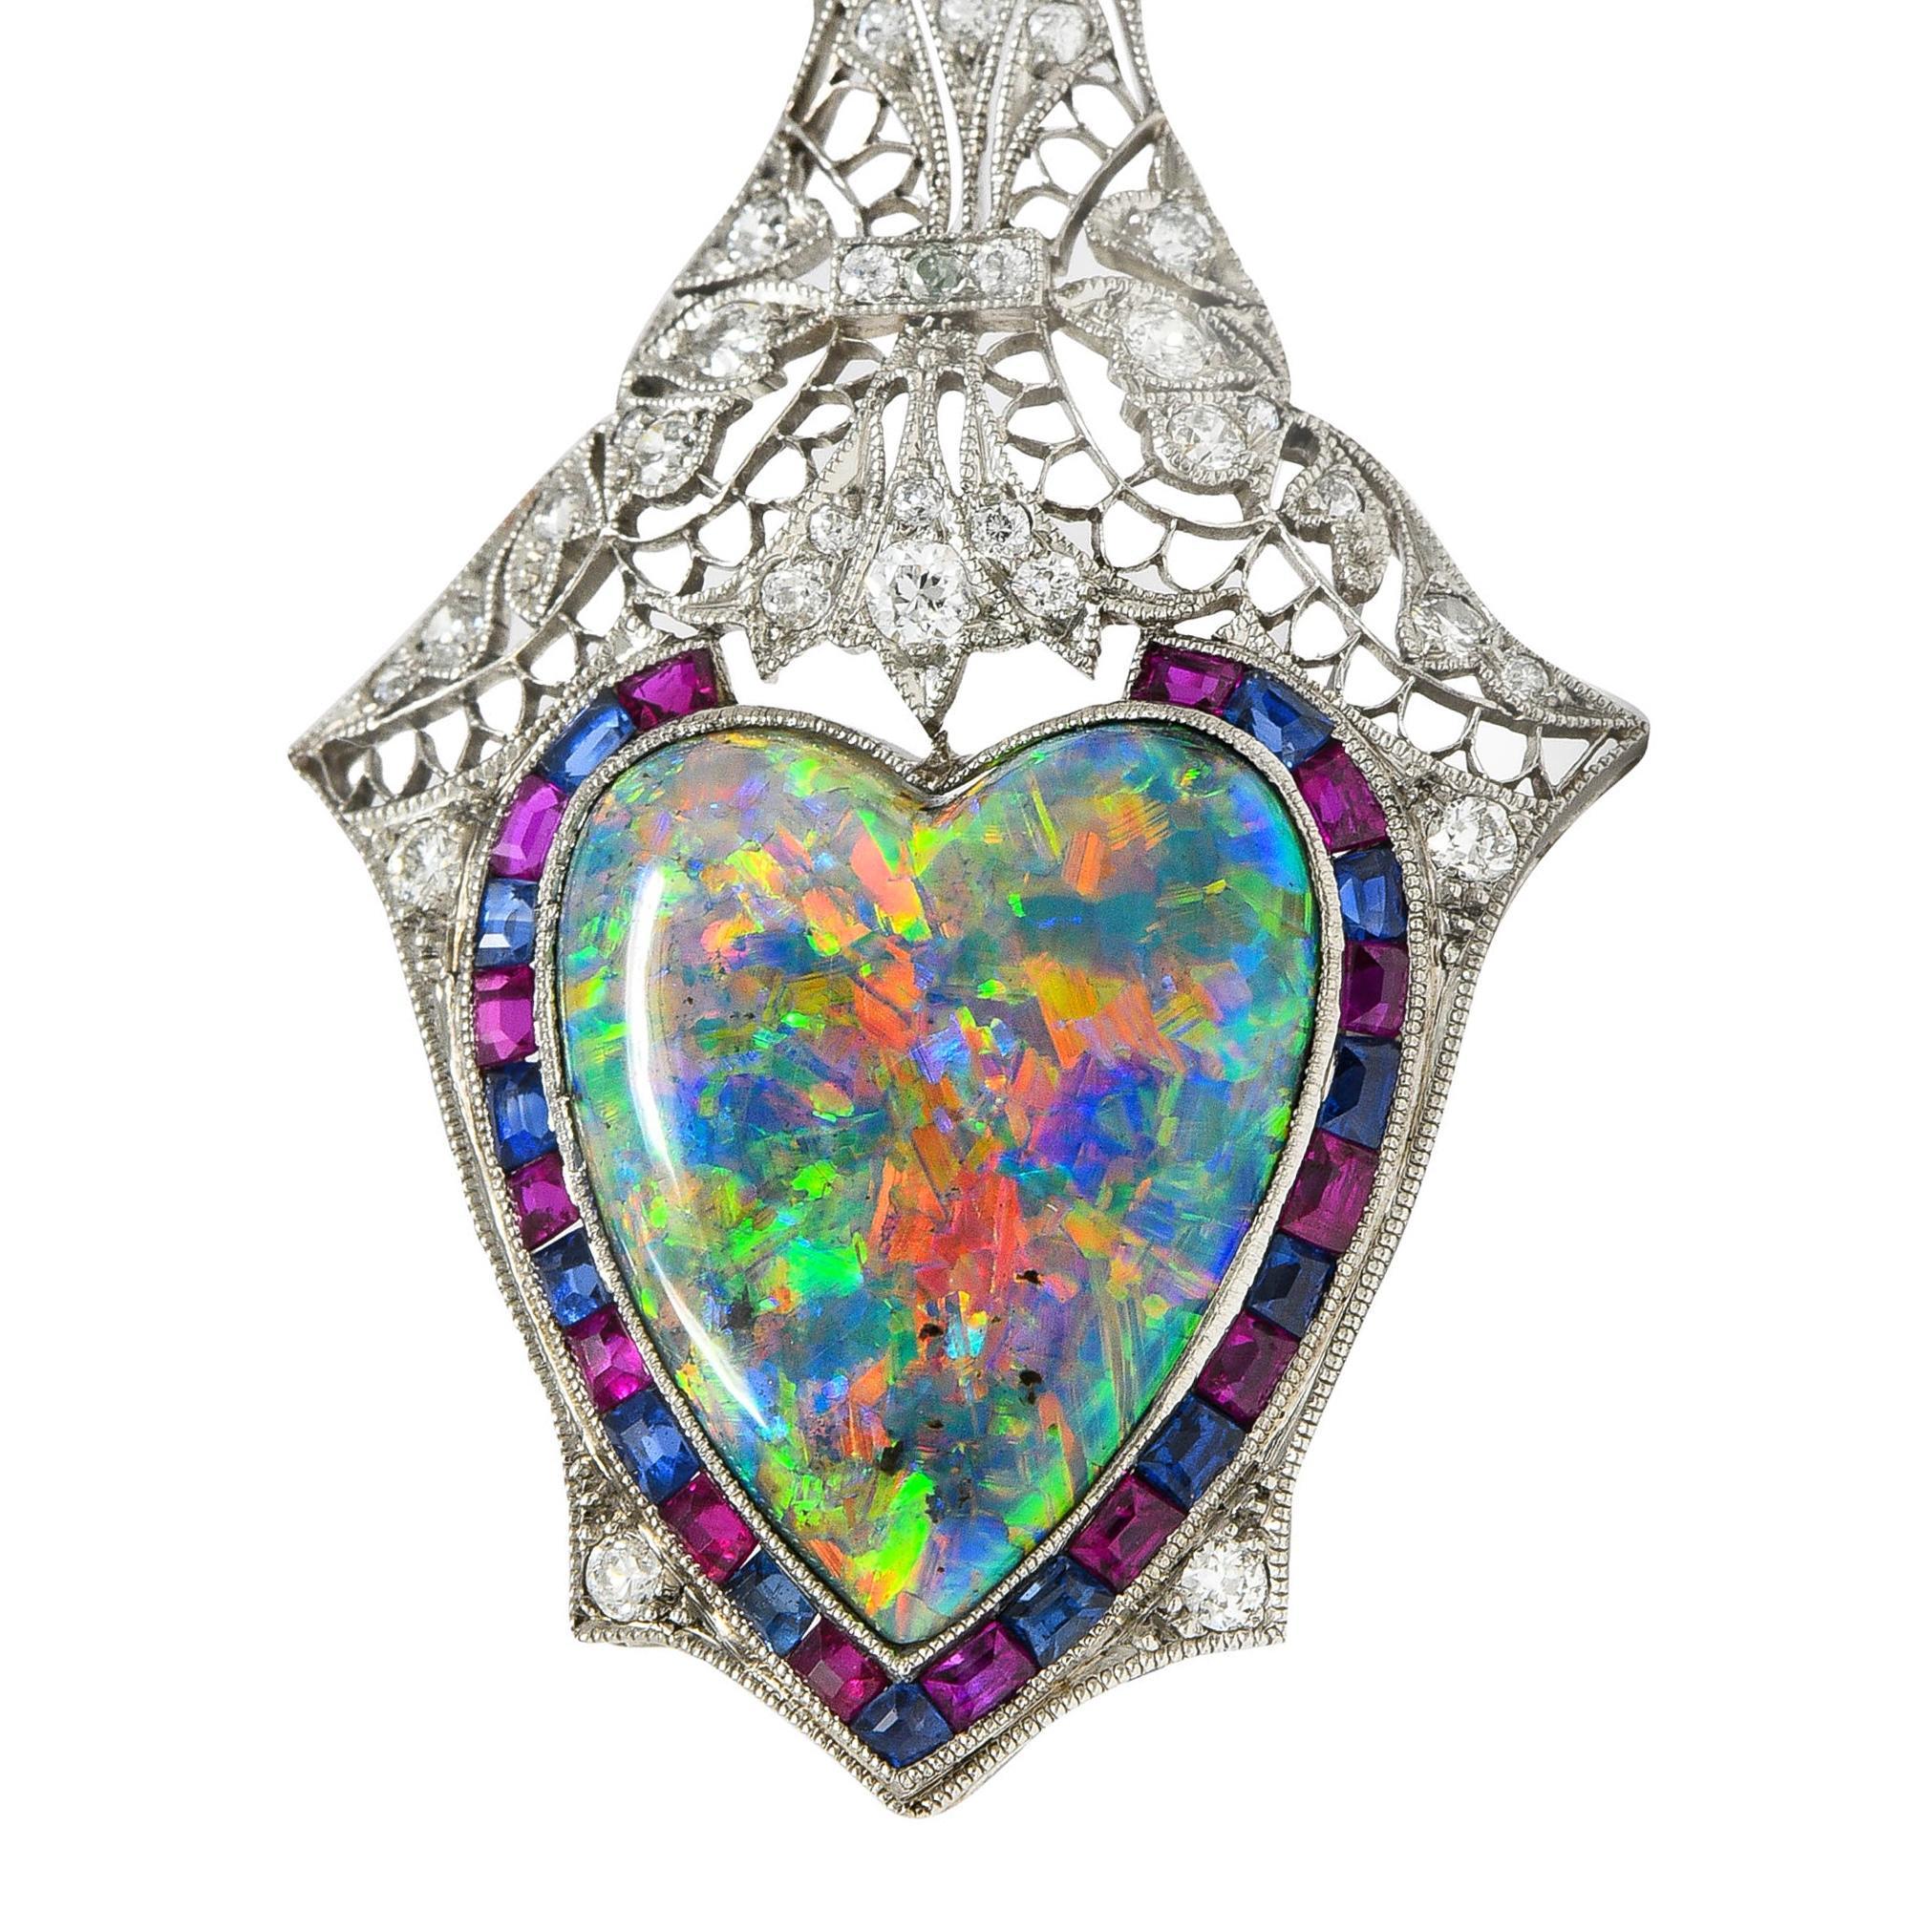 Designed as an ornately pierced plaque-shaped pendant and bale with filigree and flowing foliate motifs
Featuring a heart-shaped opal cabochon weighing approximately 6.42 carats - bezel set
Black in body color with spectral play-of-color and subtle